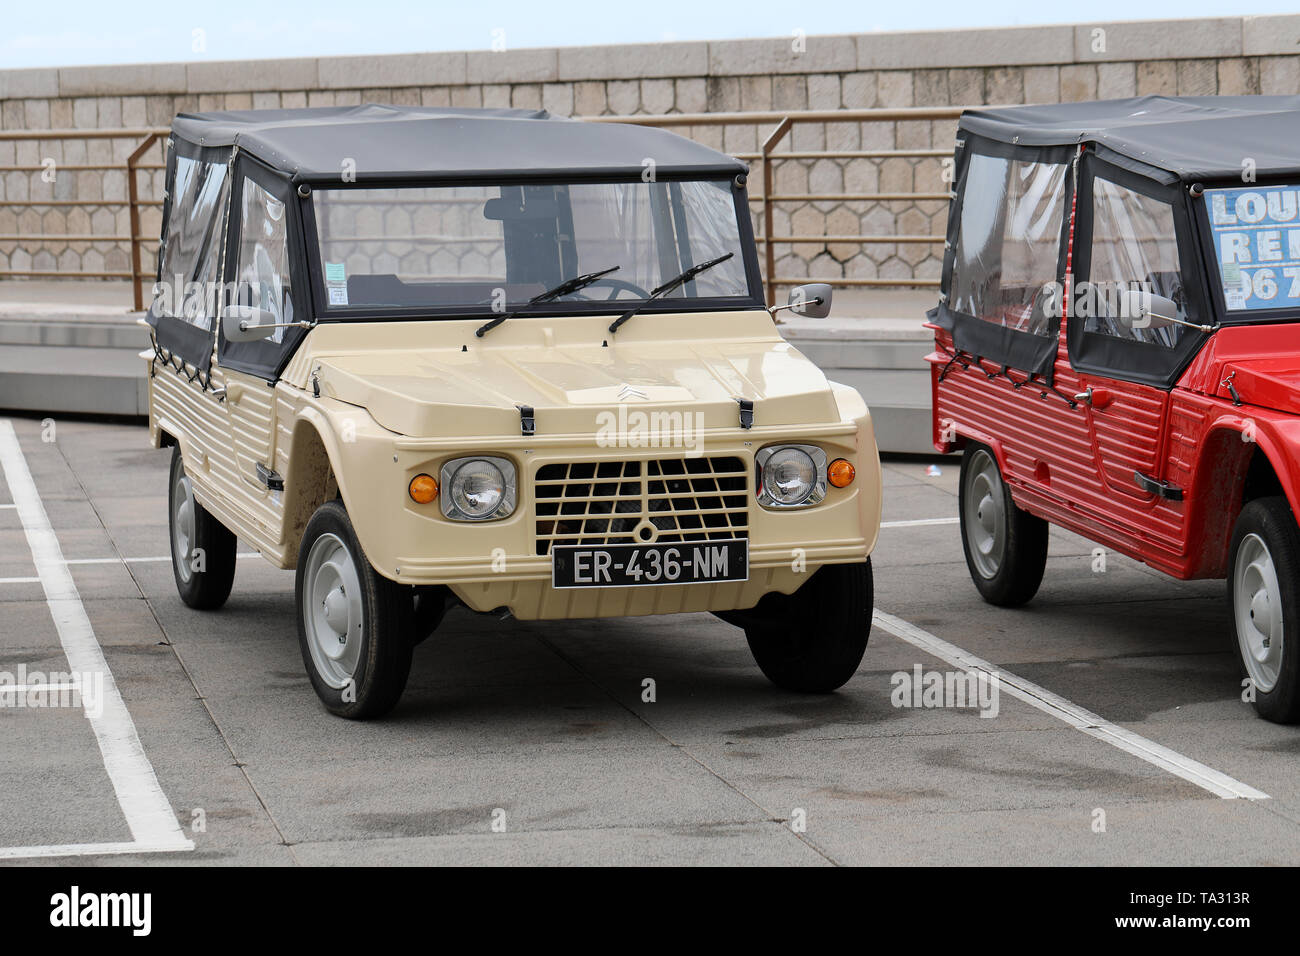 Nice, France - May 21, 2019: Vintage Beige Citroen Mehari (Front View) French Car Parked In A Parking Lot In Nice On The French Riviera Stock Photo